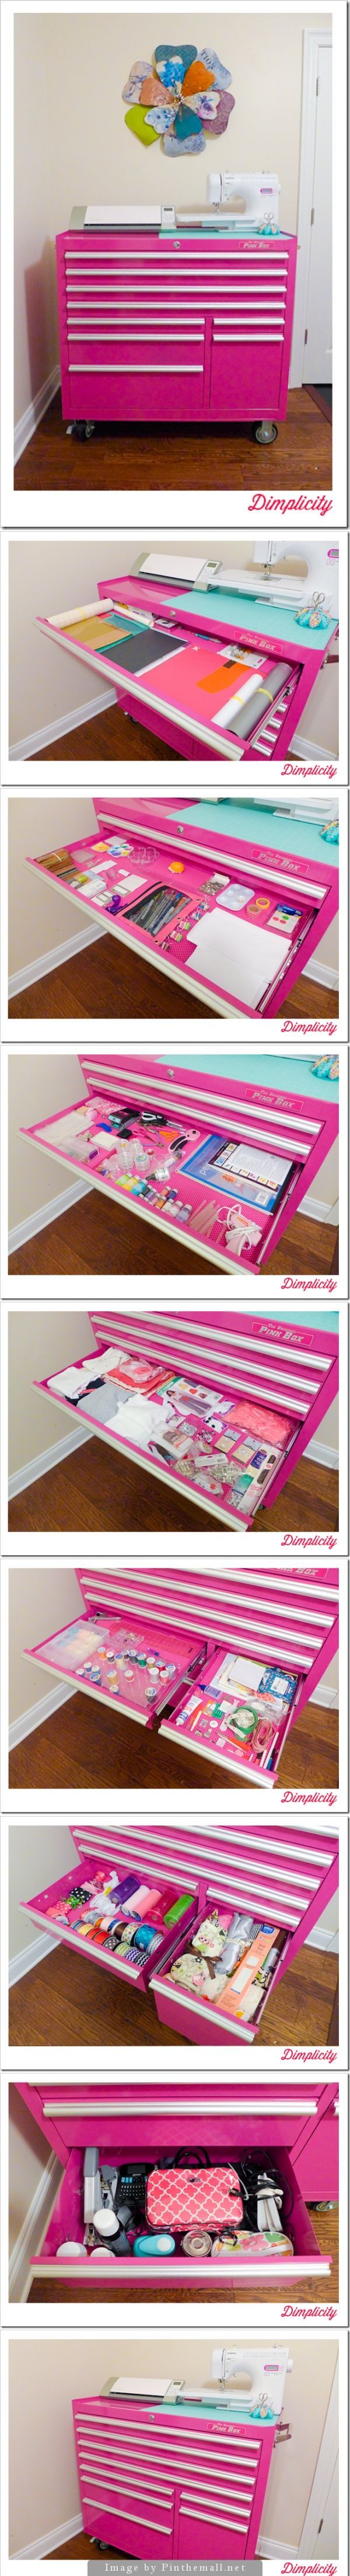 I love this craft storage idea from a toolbox. love the paint color.  this would be great for stamping supplies.